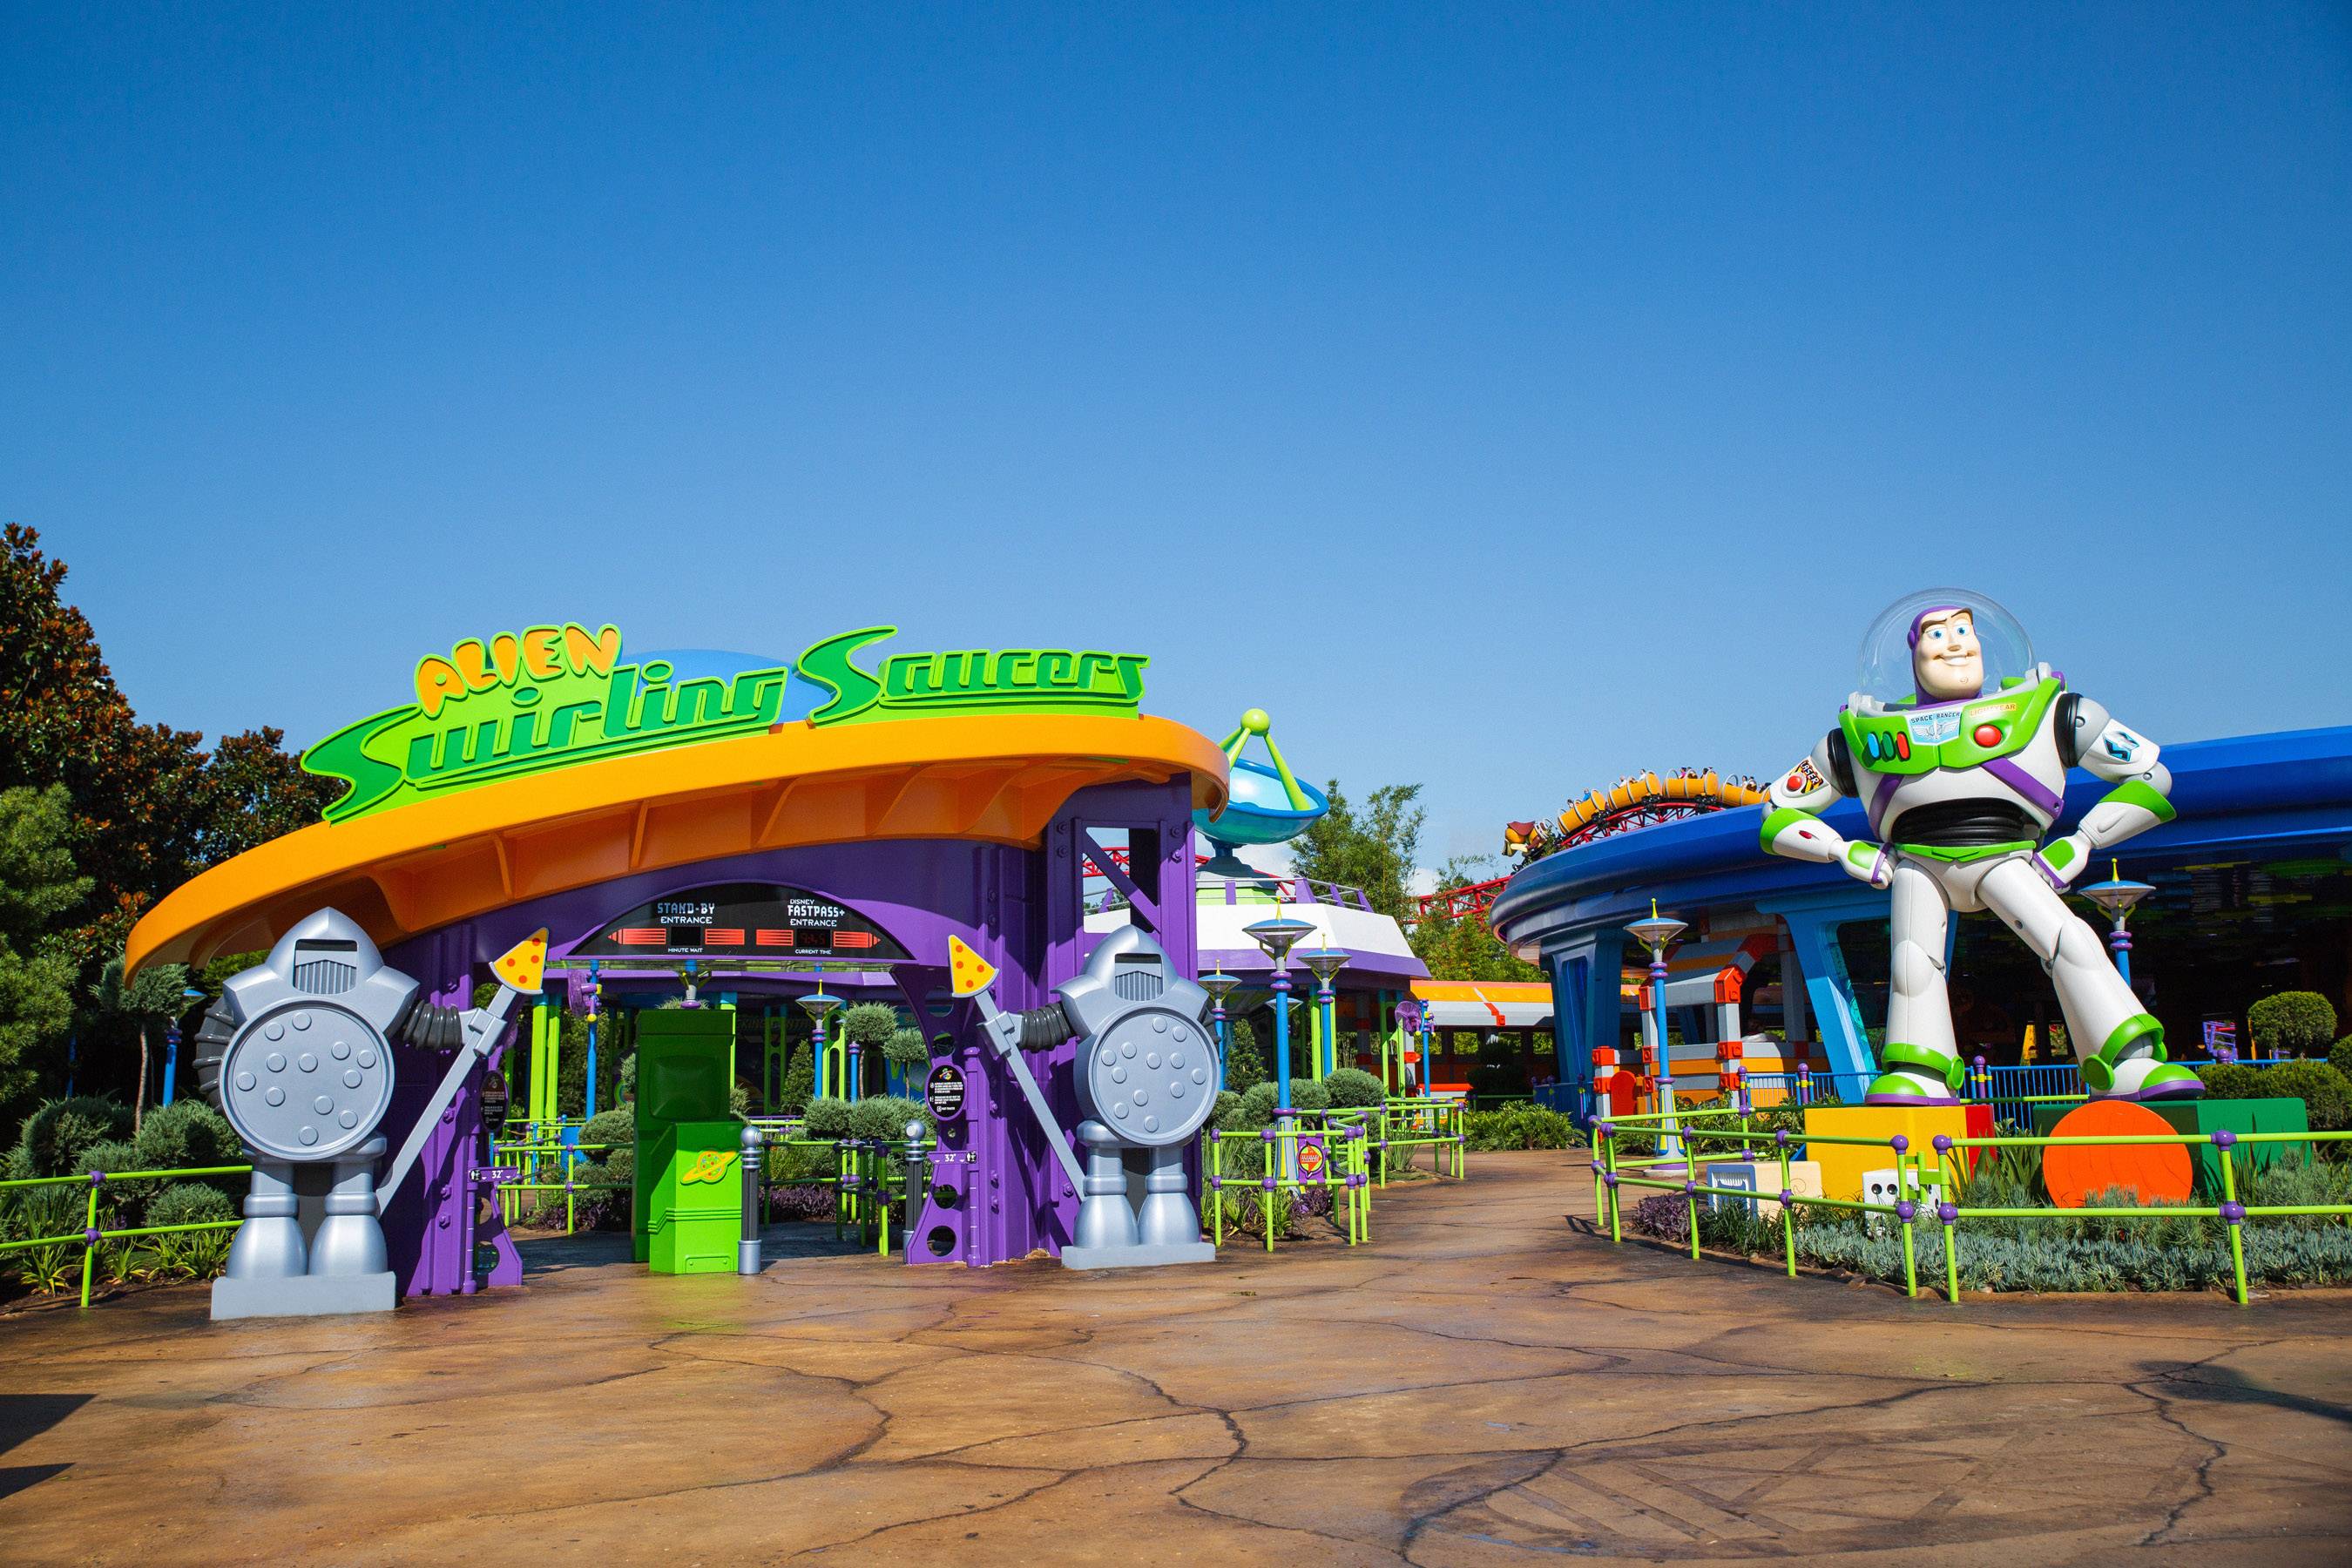 Alien Swirling Saucers attraction entrance